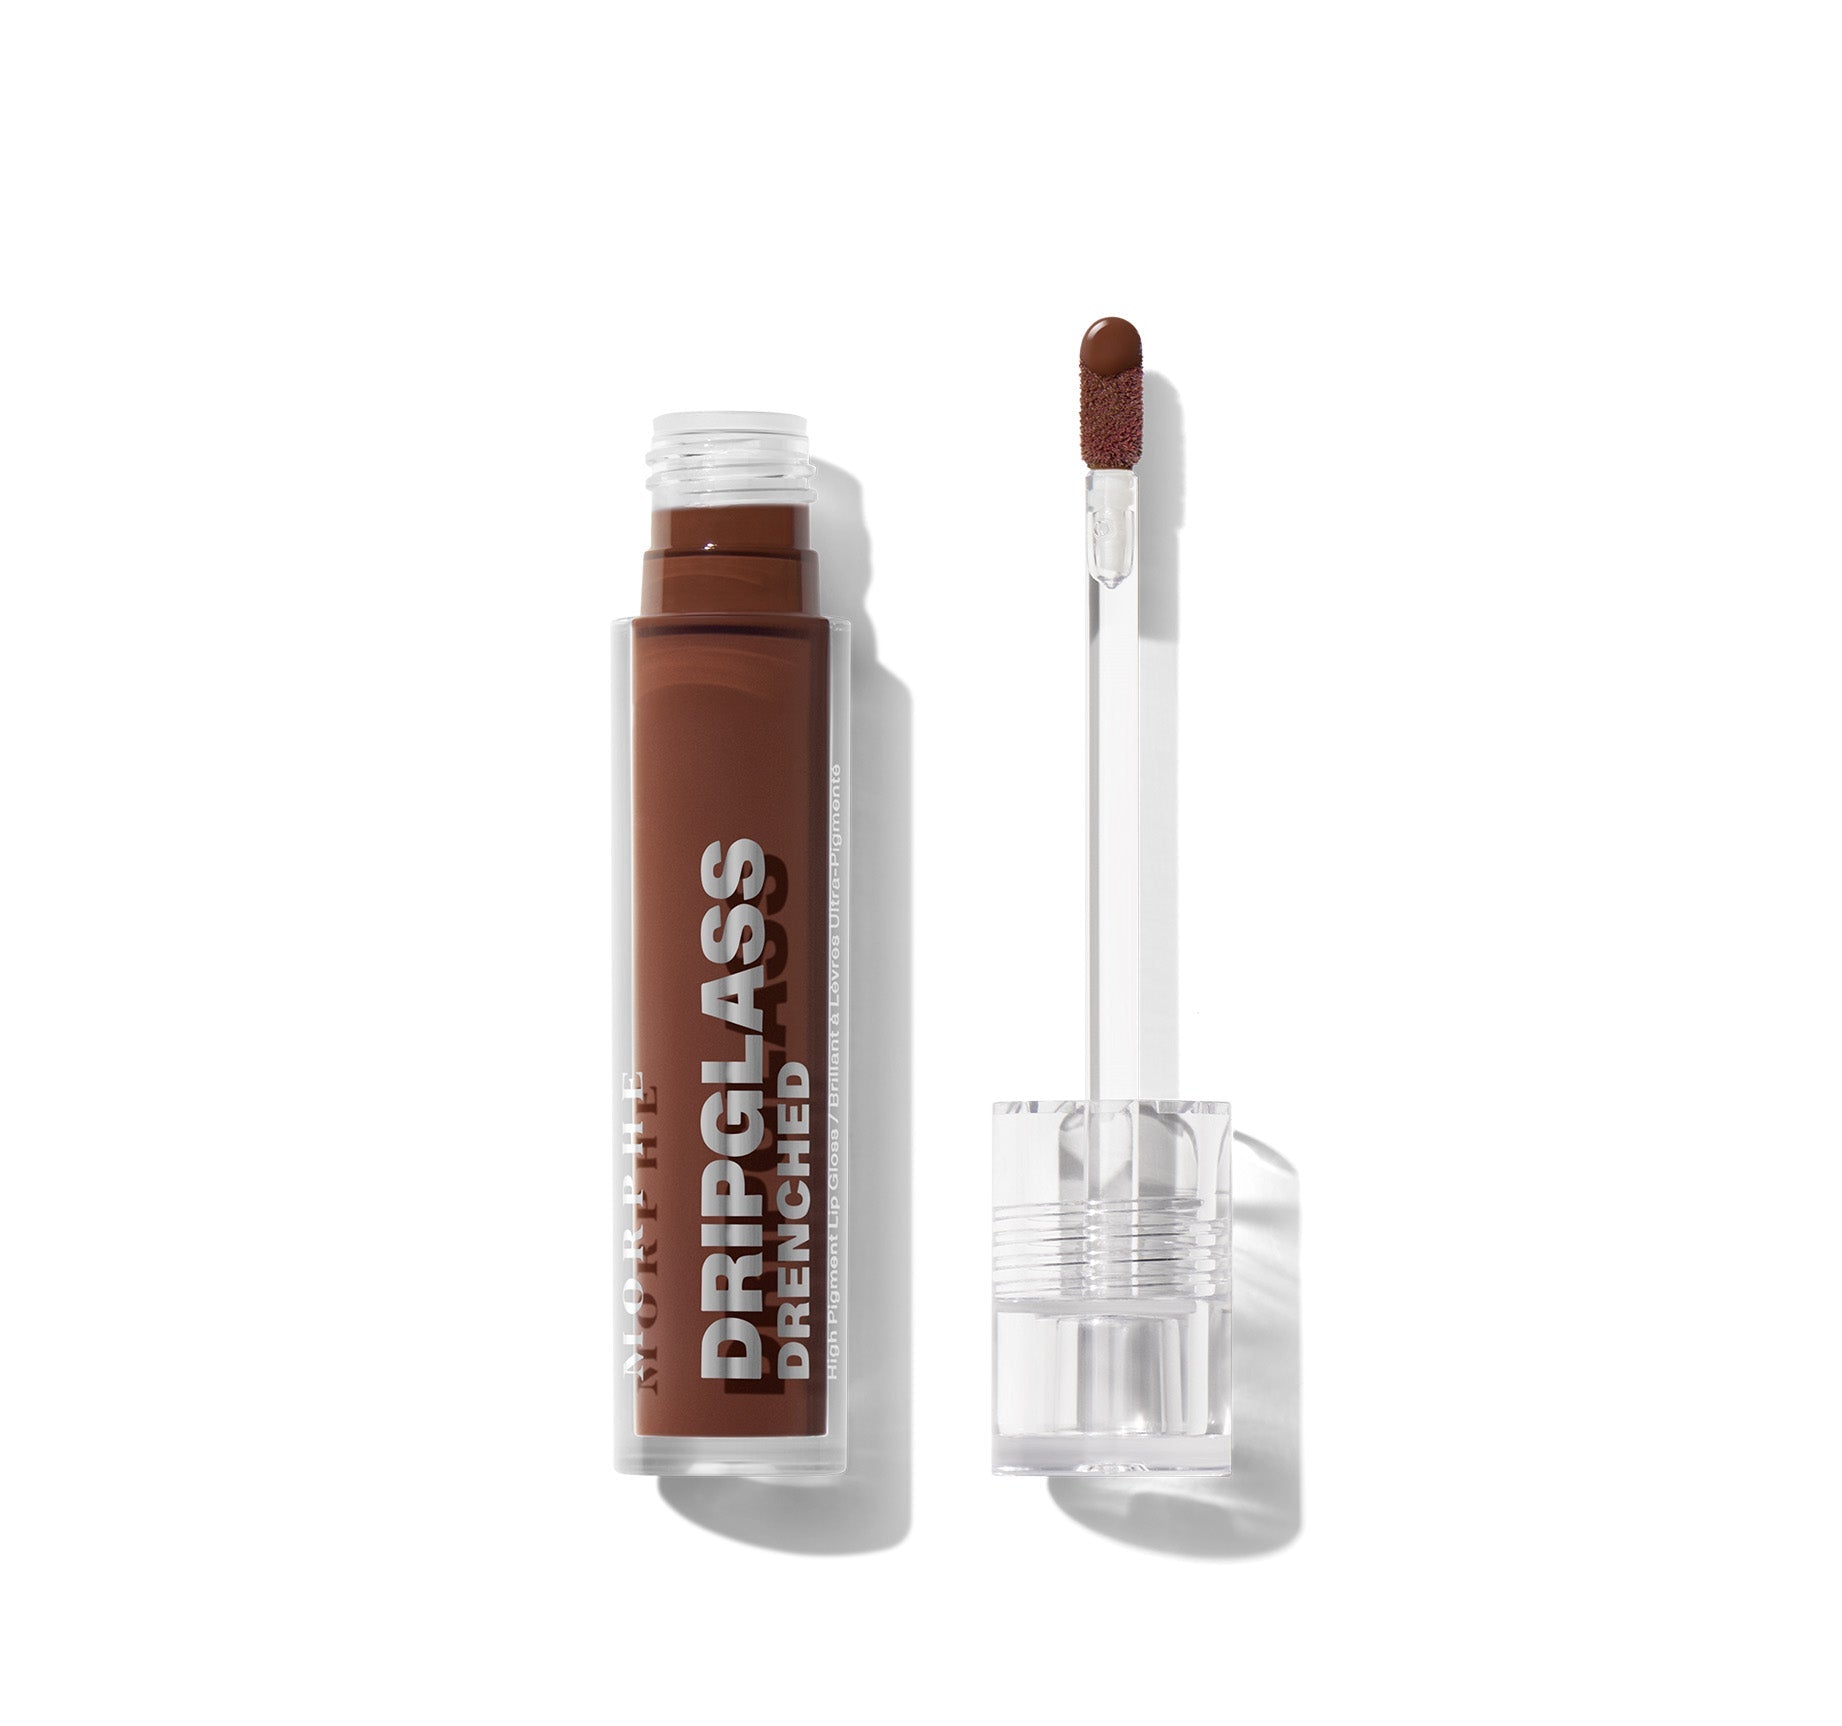 Dripglass Drenched High Pigment Lip Gloss - Cocoa Melt - Image 1